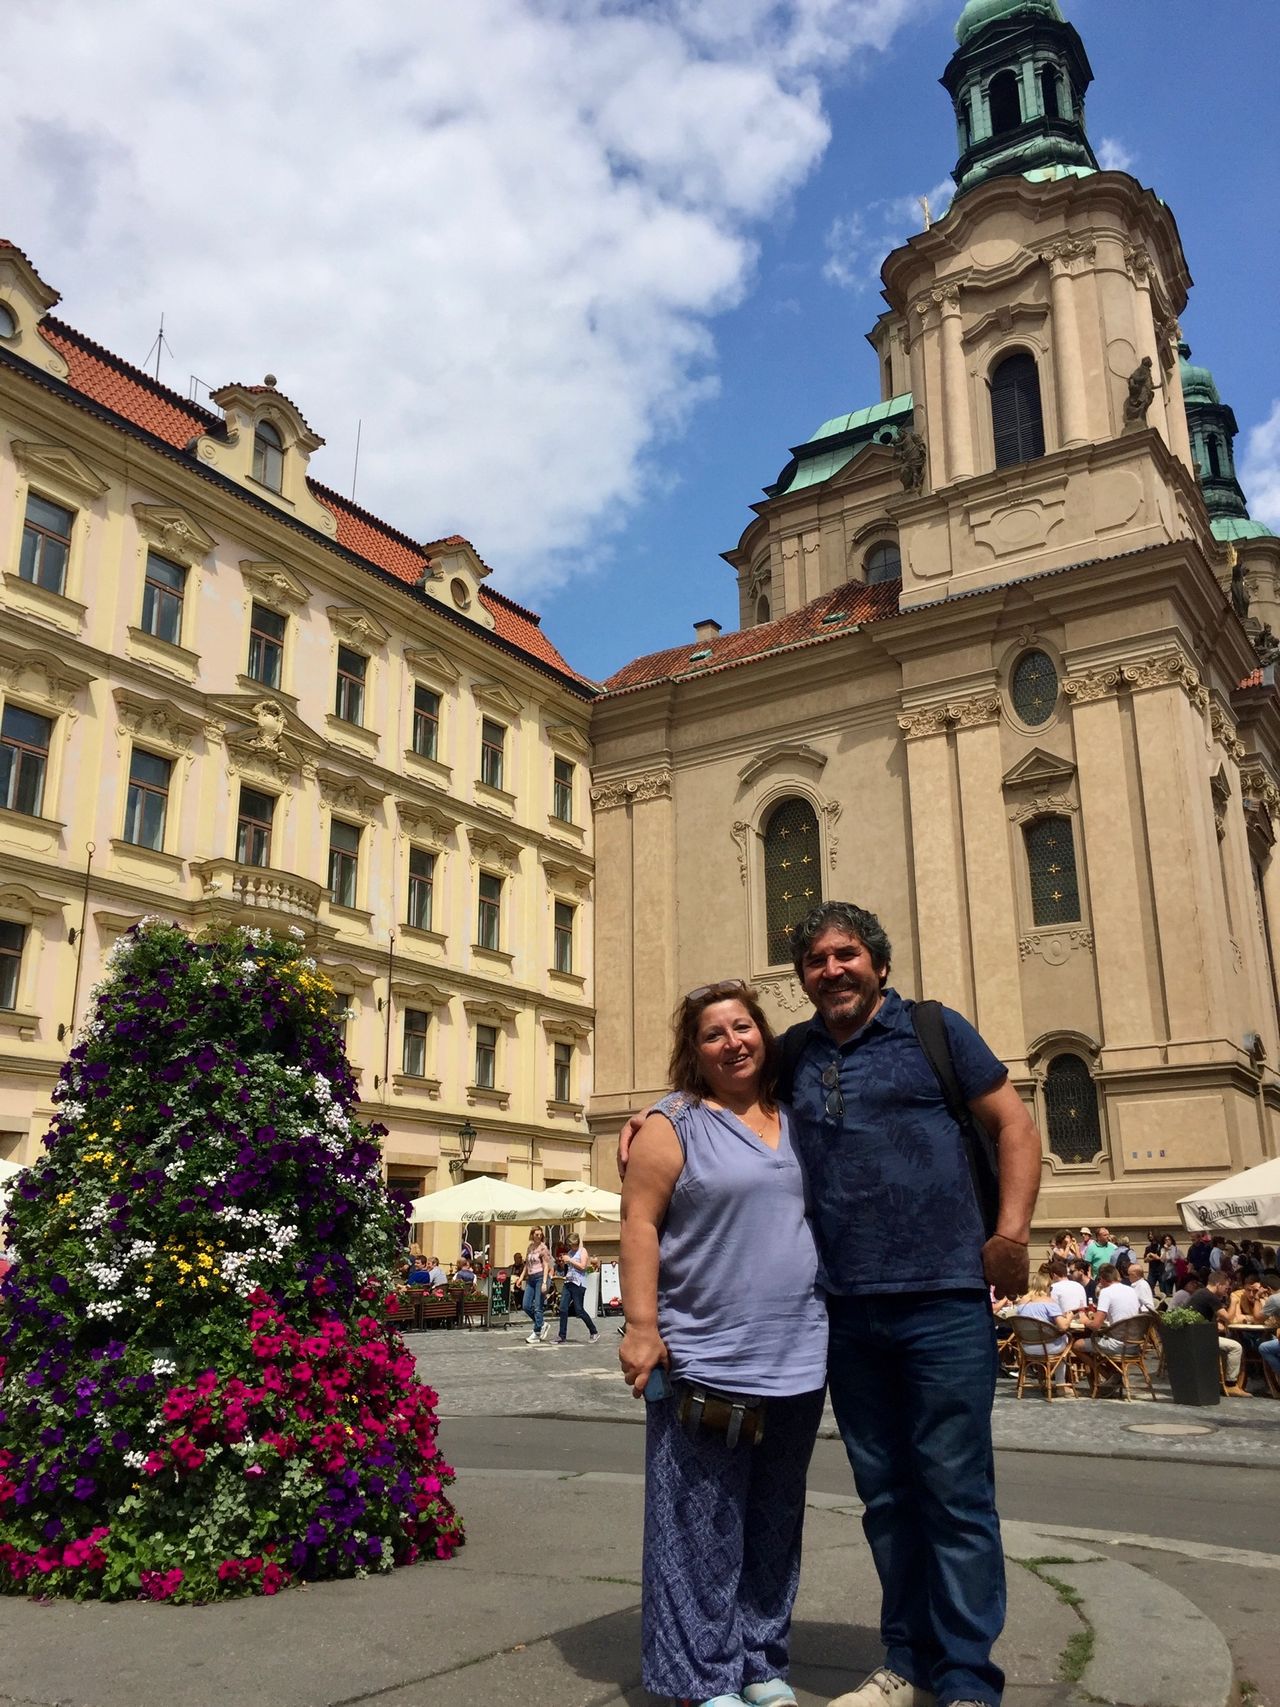 Man and woman standing near flowers and church building.